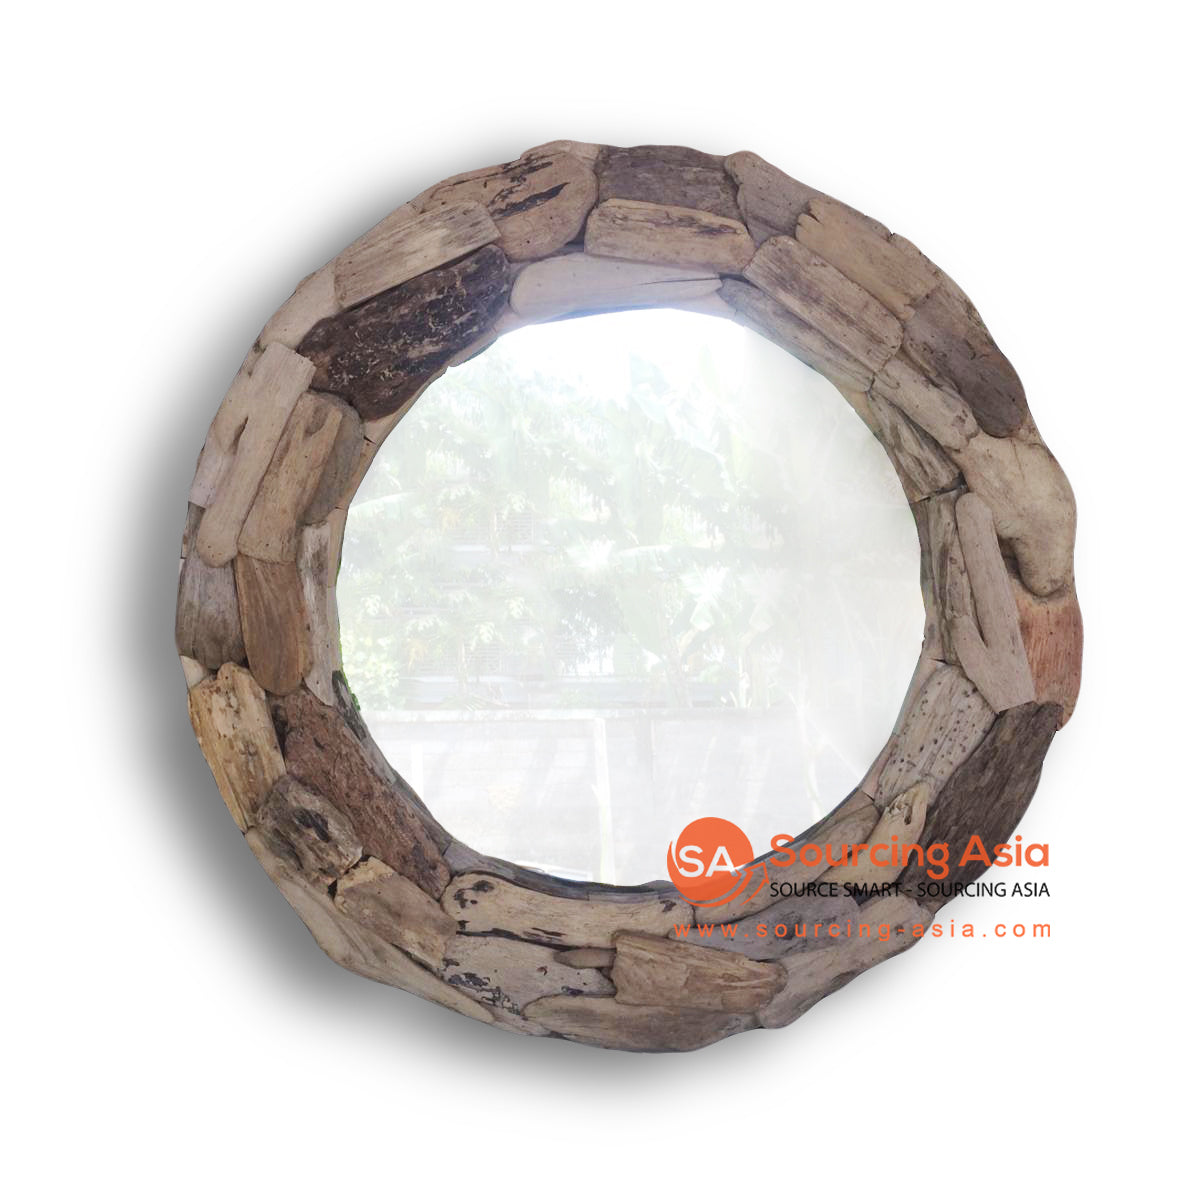 PJY032-1 NATURAL DRIFTWOOD ROUND DECORATION 5MM